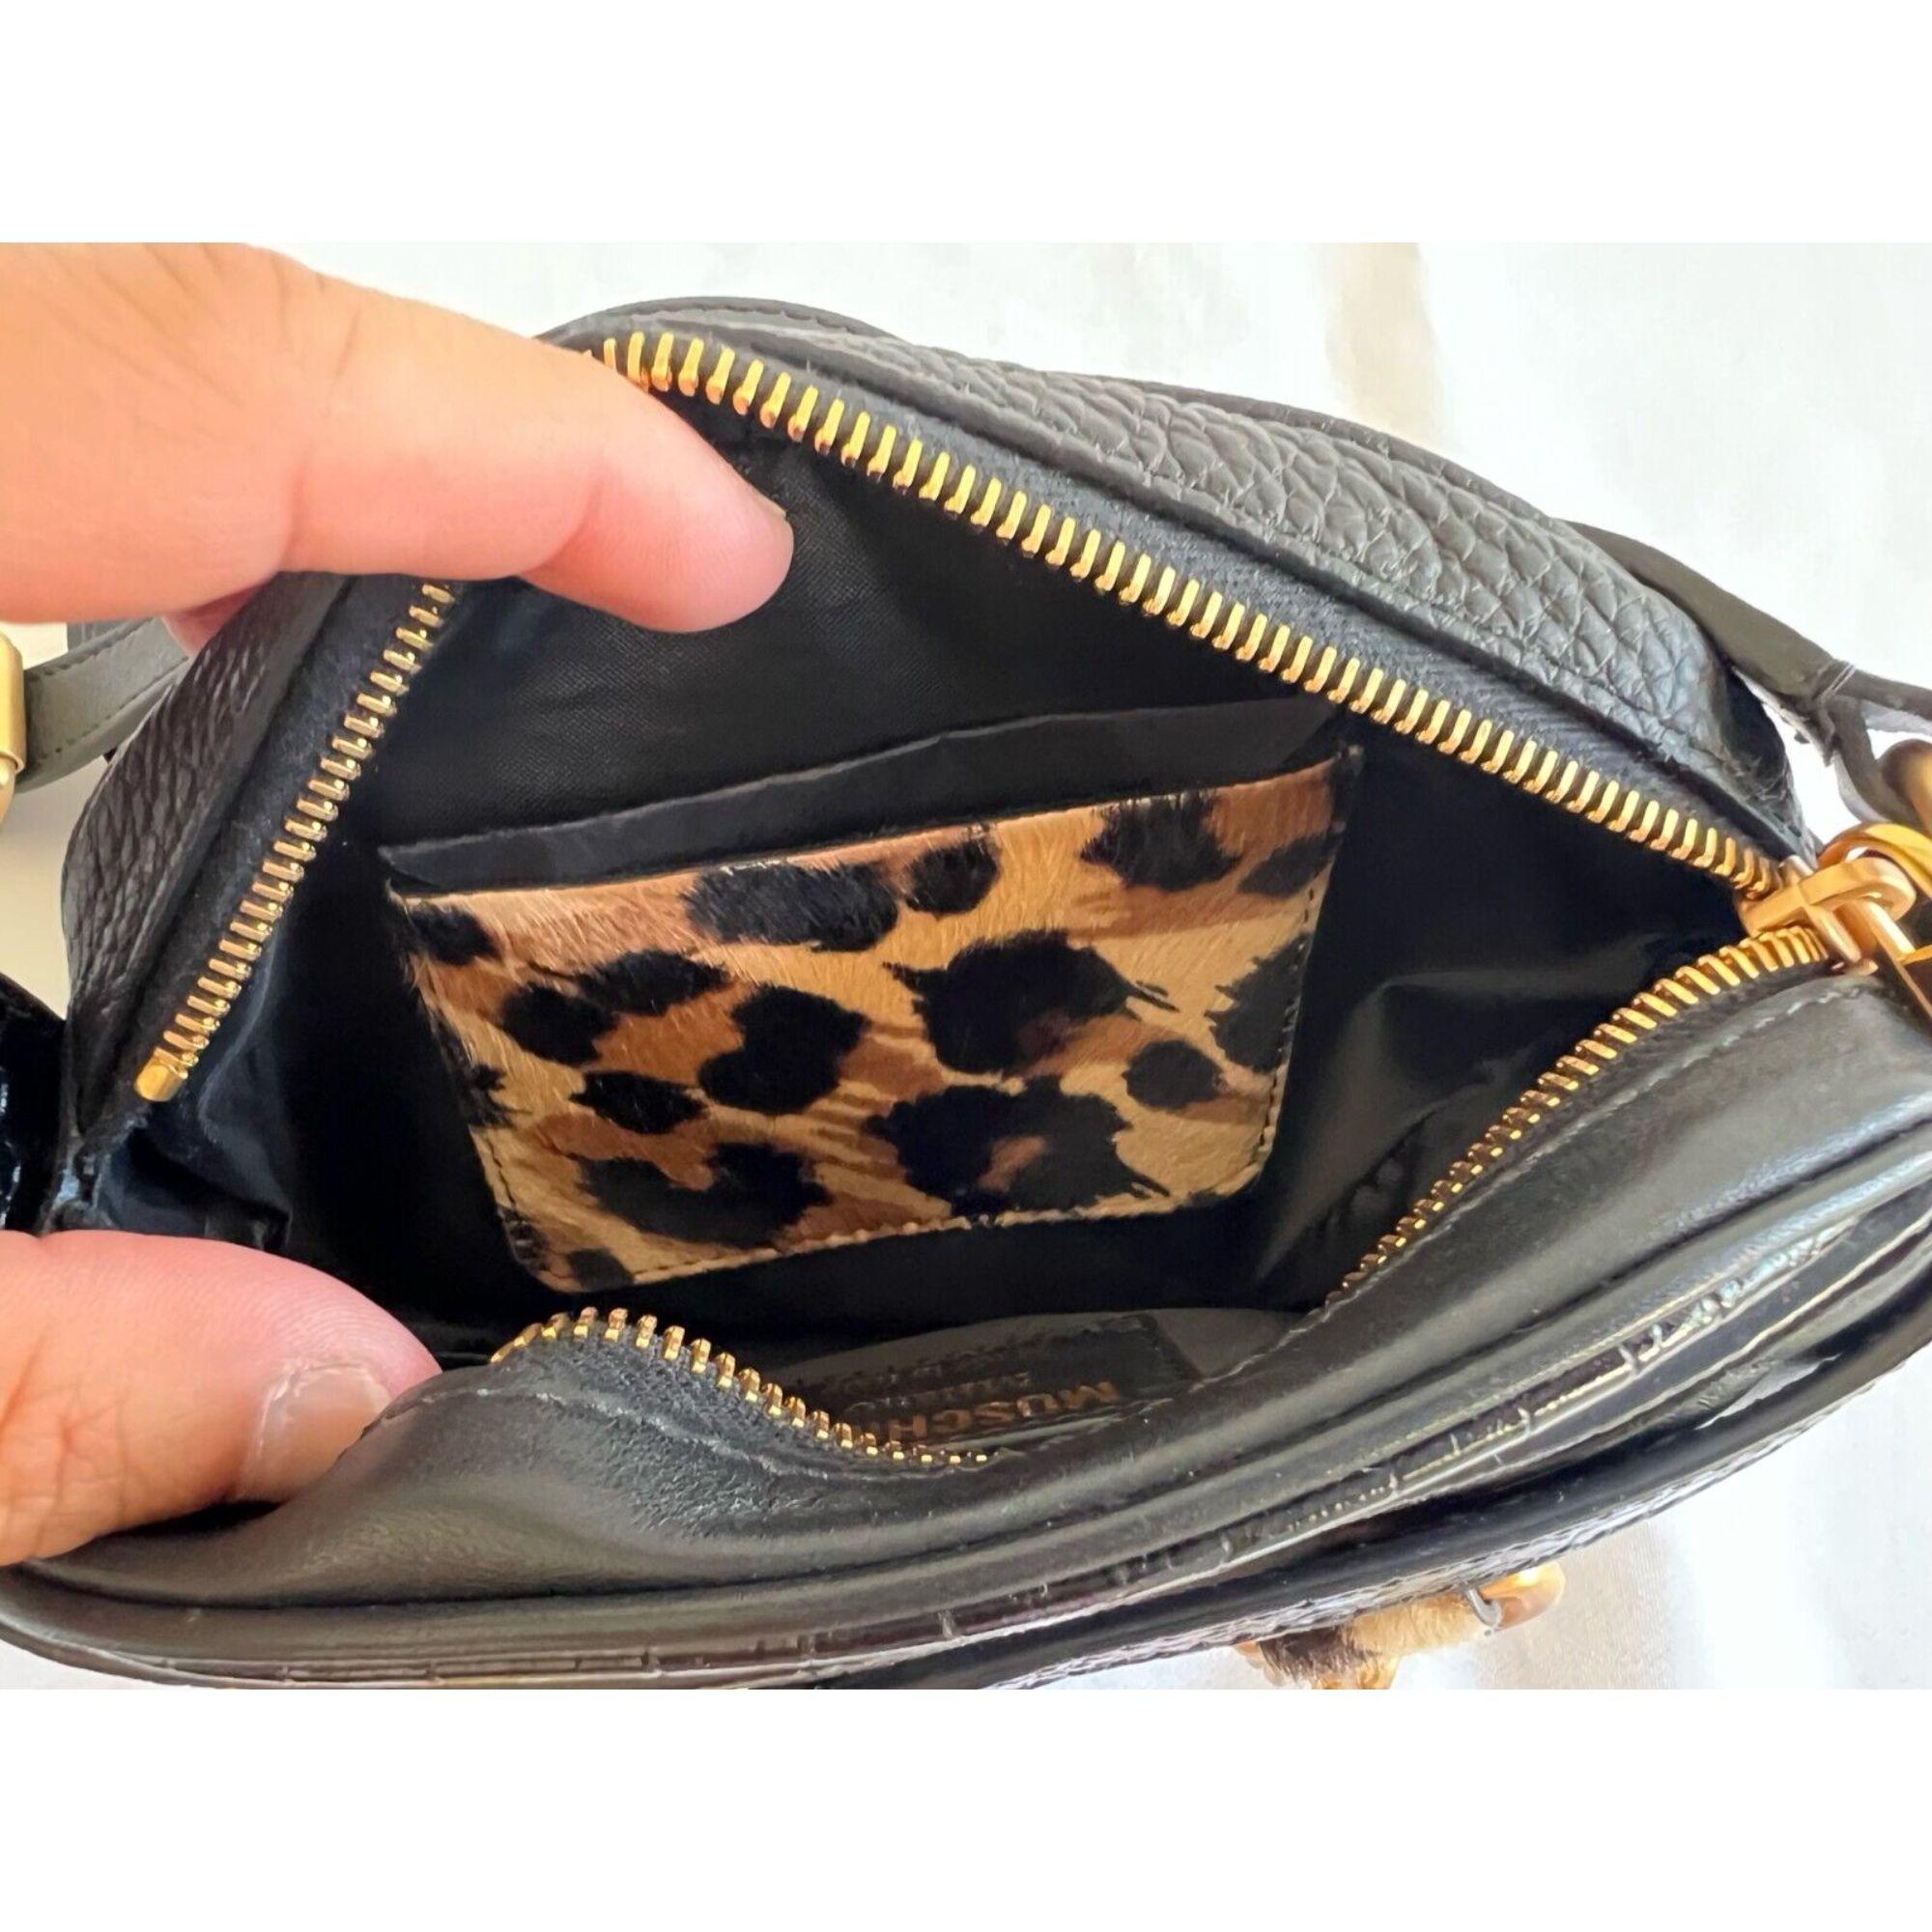 AW21 Moschino Couture Gold Leopard Black Leather Shoulder Bag by Jeremy Scott For Sale 4